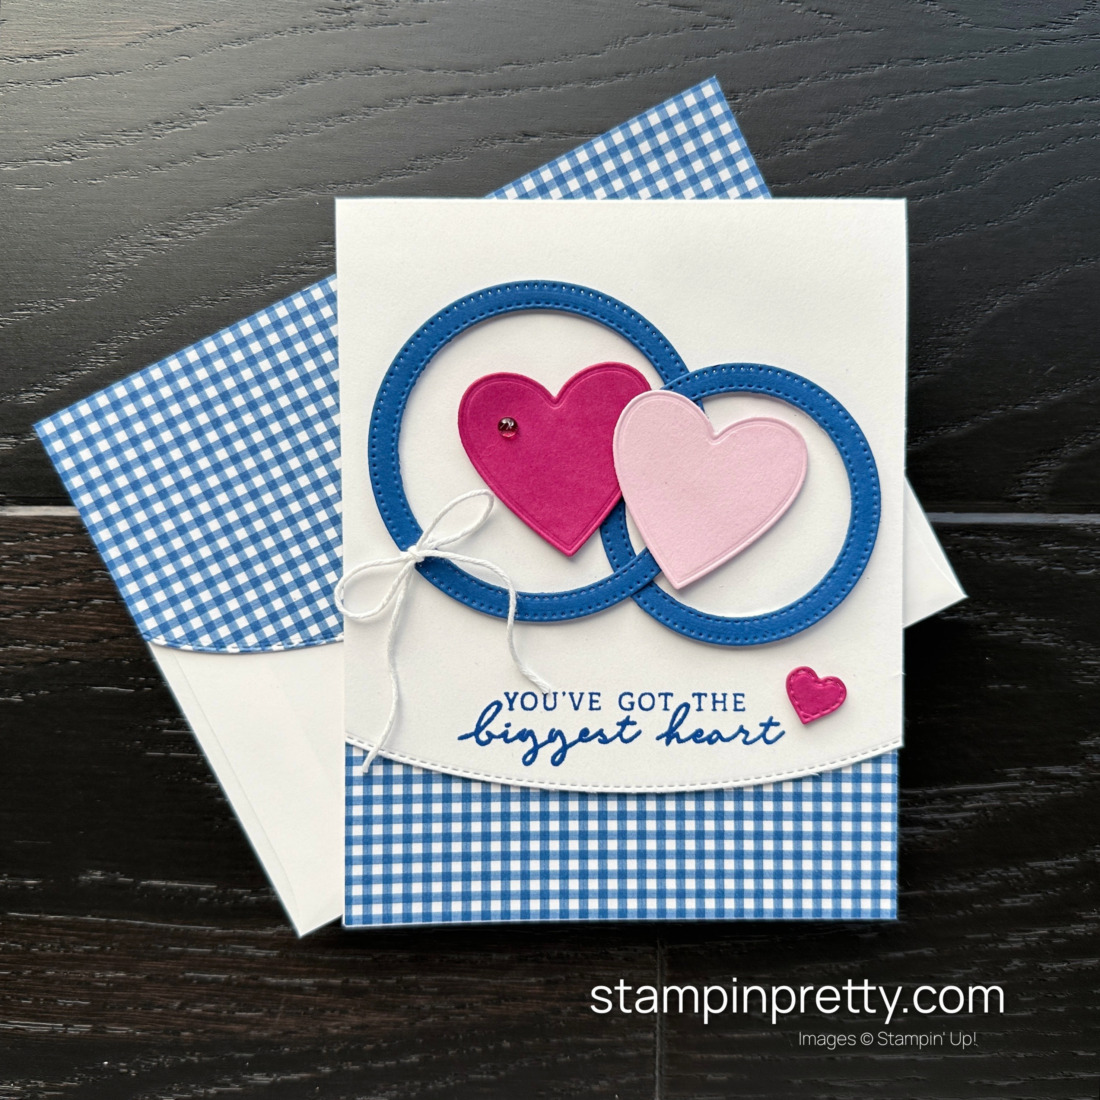 Create this love card with the Happy Labels Stamp Set and Stylish Shapes Dies from Stampin' Up! Card by Mary Fish, Stampin' Pretty